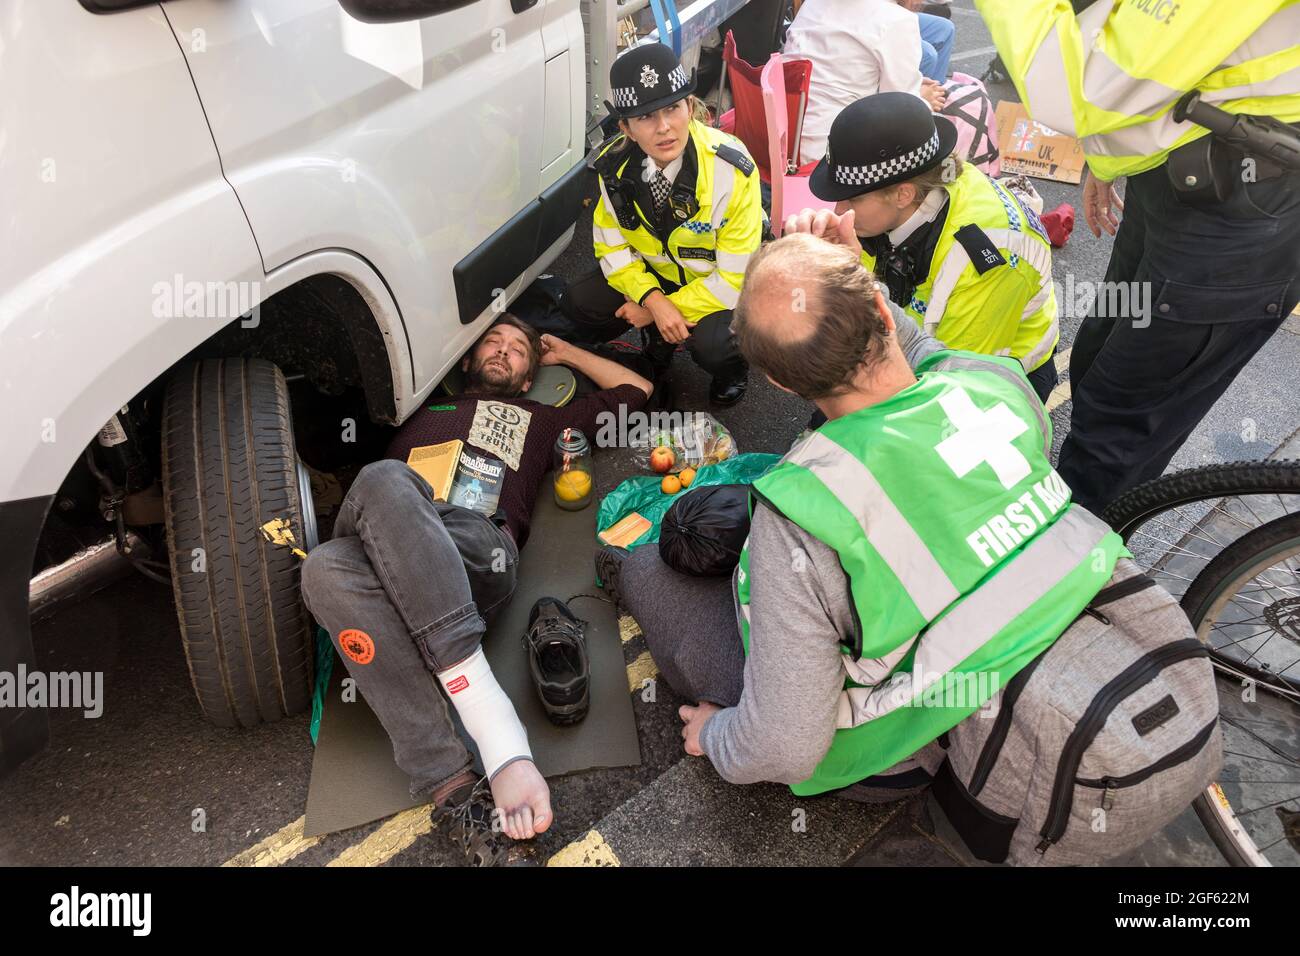 London, UK. 23rd Aug, 2021. Police officers remove and arrest a demonstrator who stuck himself under a van during the protest in Covent Garden.Extinction Rebellion UK initiated a protest in Covent Garden in London to raise awareness of climate change issues, urging the government to take action. Protestors were seen clashing with members of the MET ( Metropolitan ) police force throughout. Some protestors have locked themselves under vans and refused to leave the space. Credit: SOPA Images Limited/Alamy Live News Stock Photo